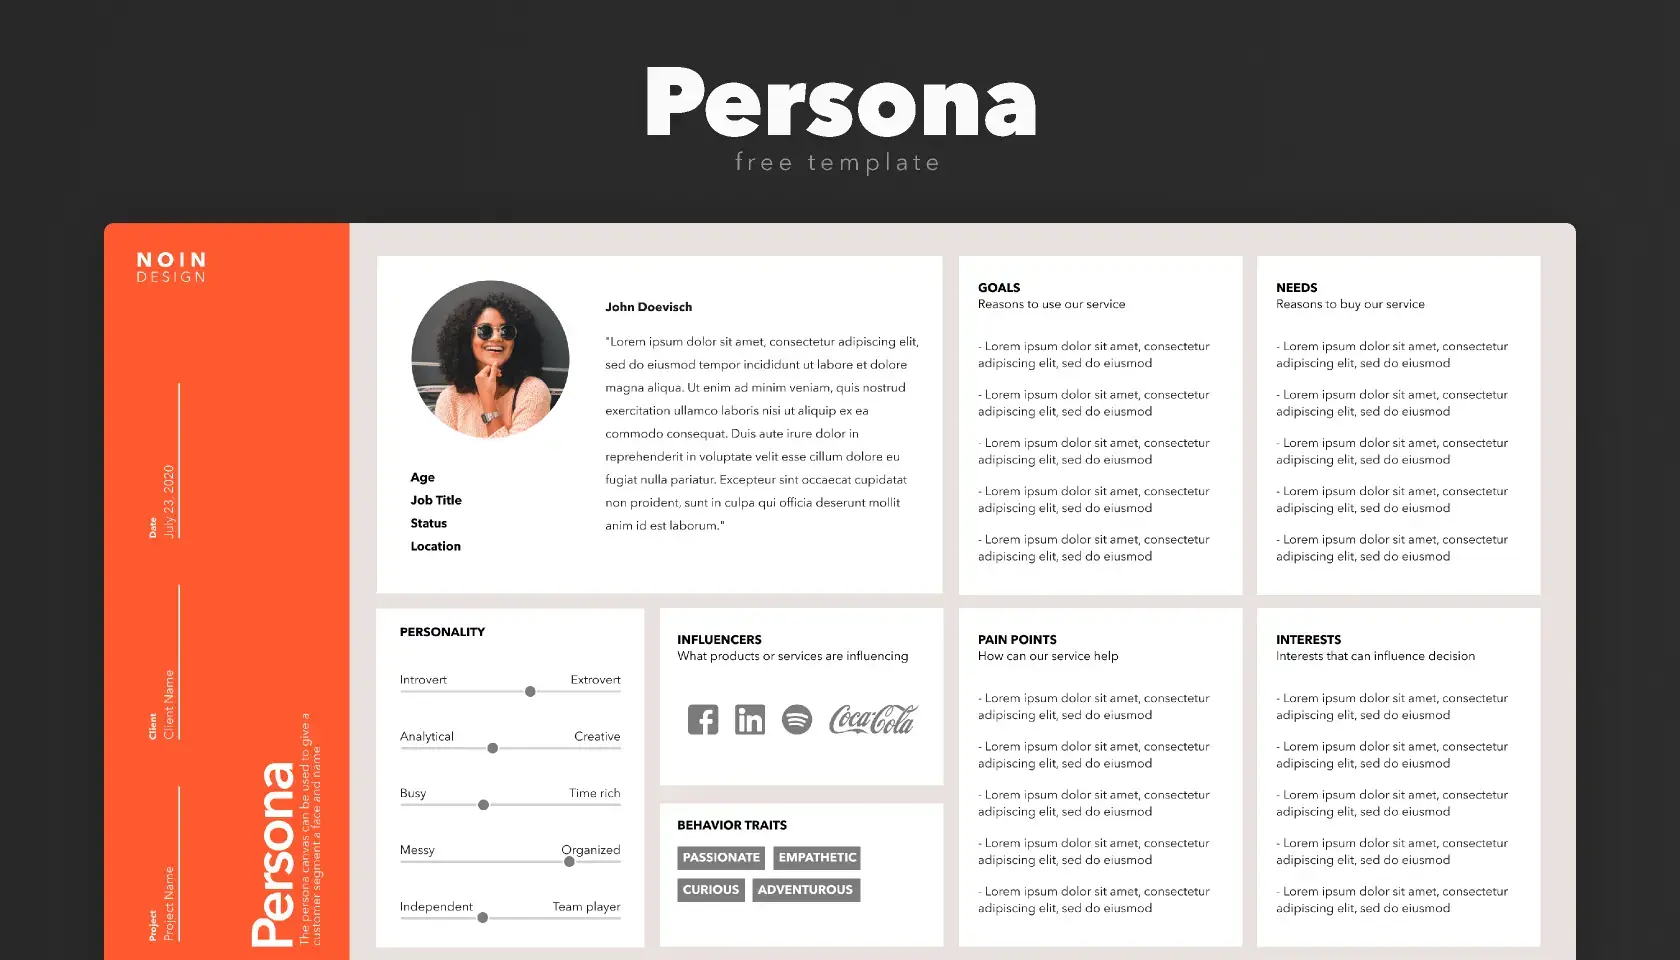 Blogduwebdesign ressources web templates user persona by noin